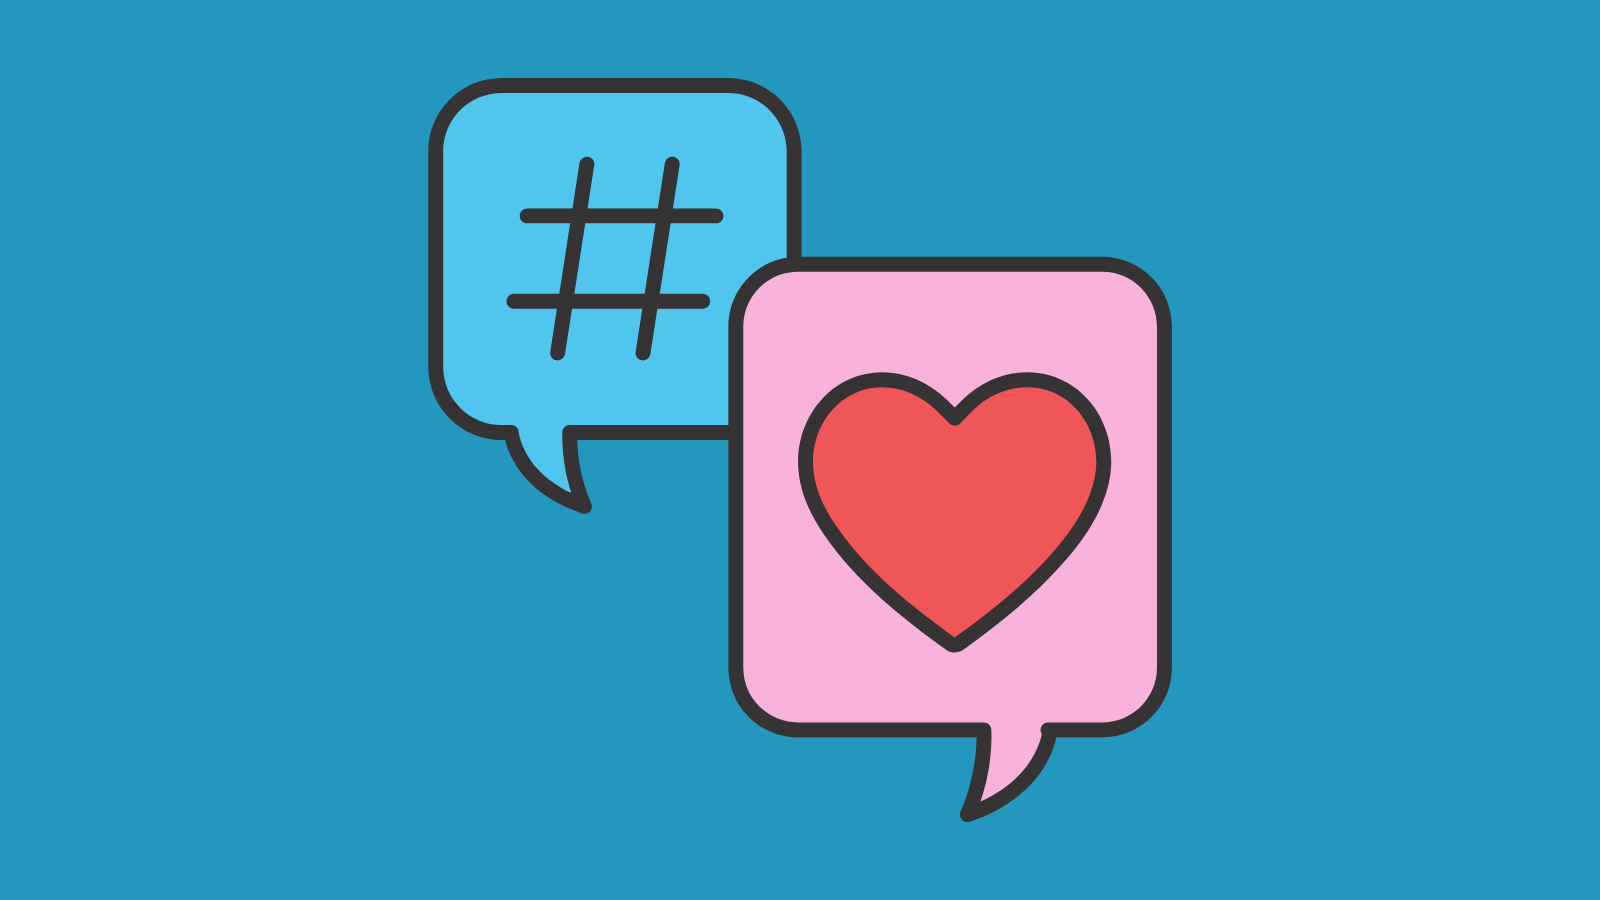 Two speech bubbles, one with a hashtag and another with a heart